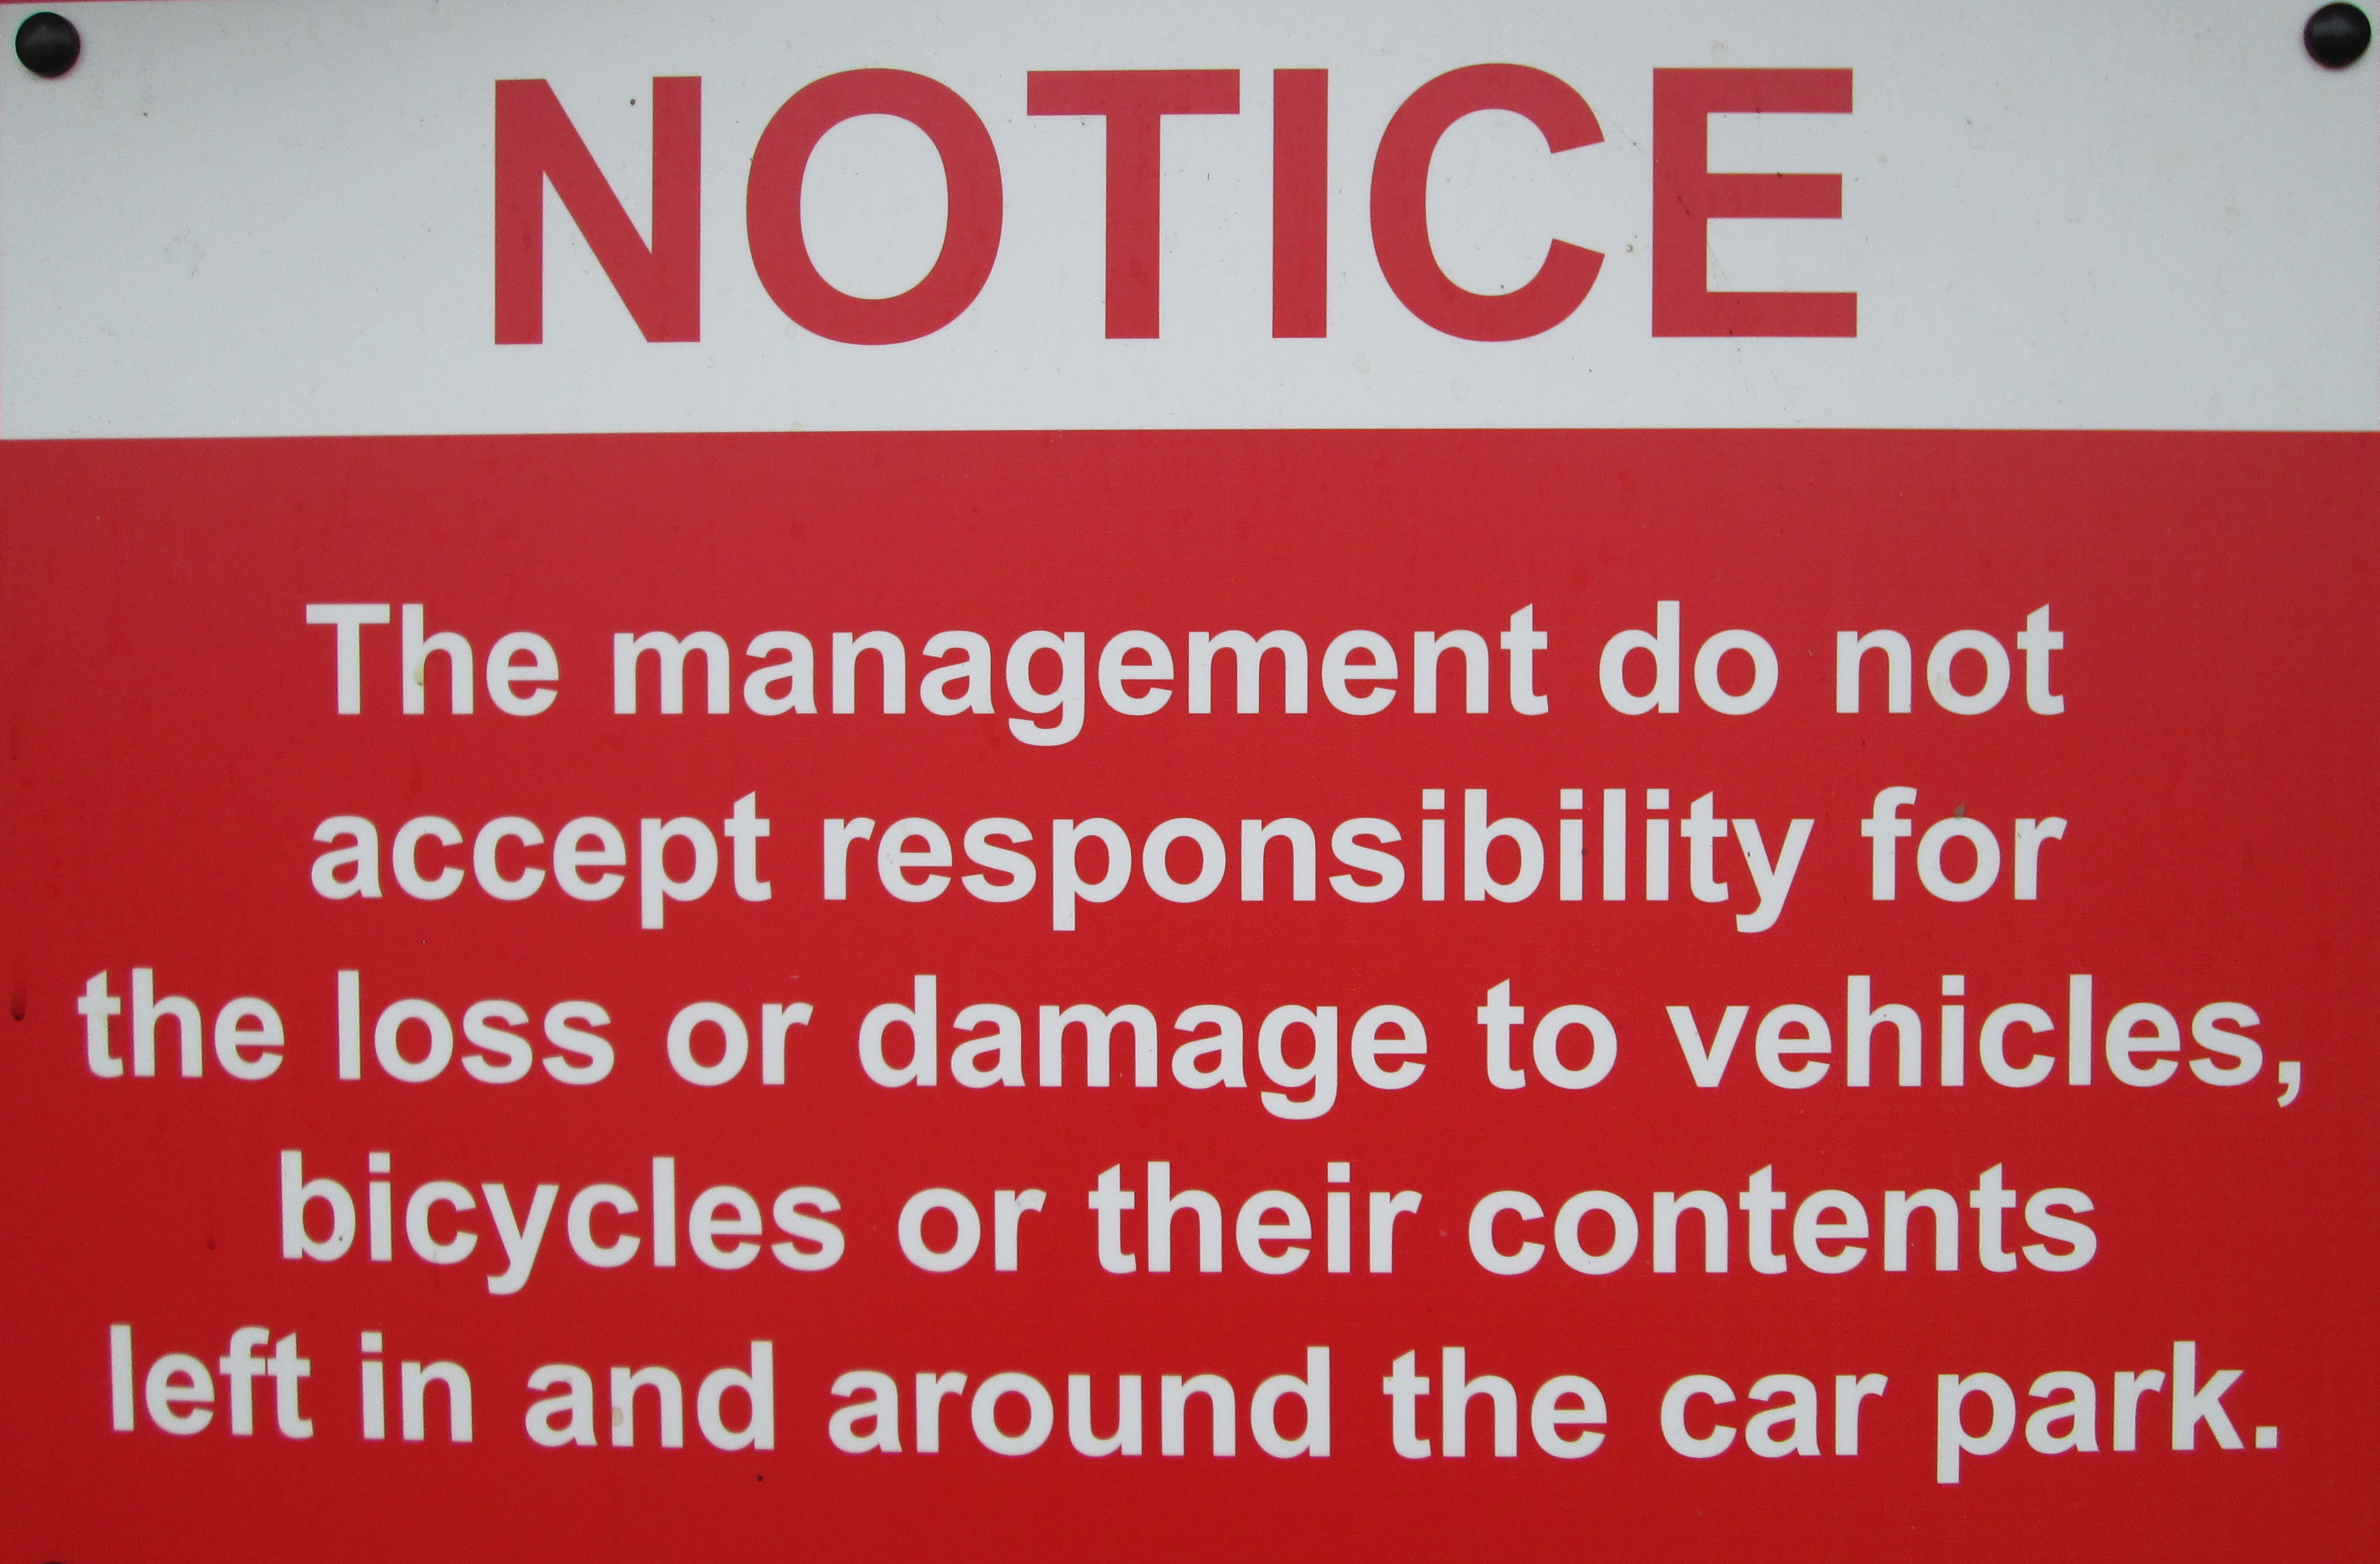 A notice in the car park reads 